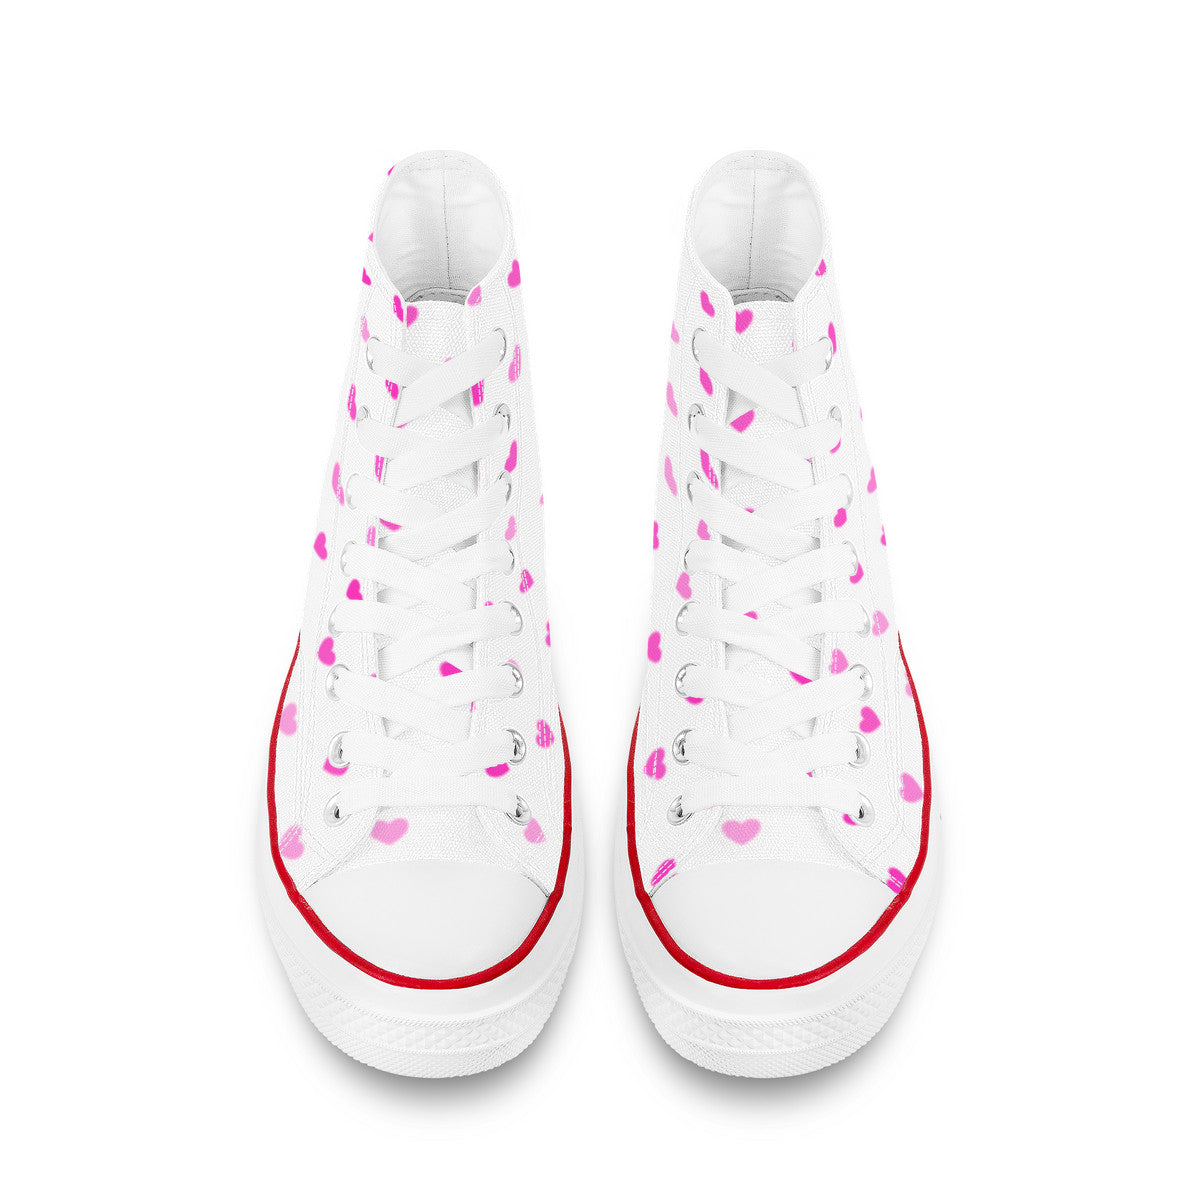 BT21 Cooky High Top Canvas Sneakers - SD-style-shop